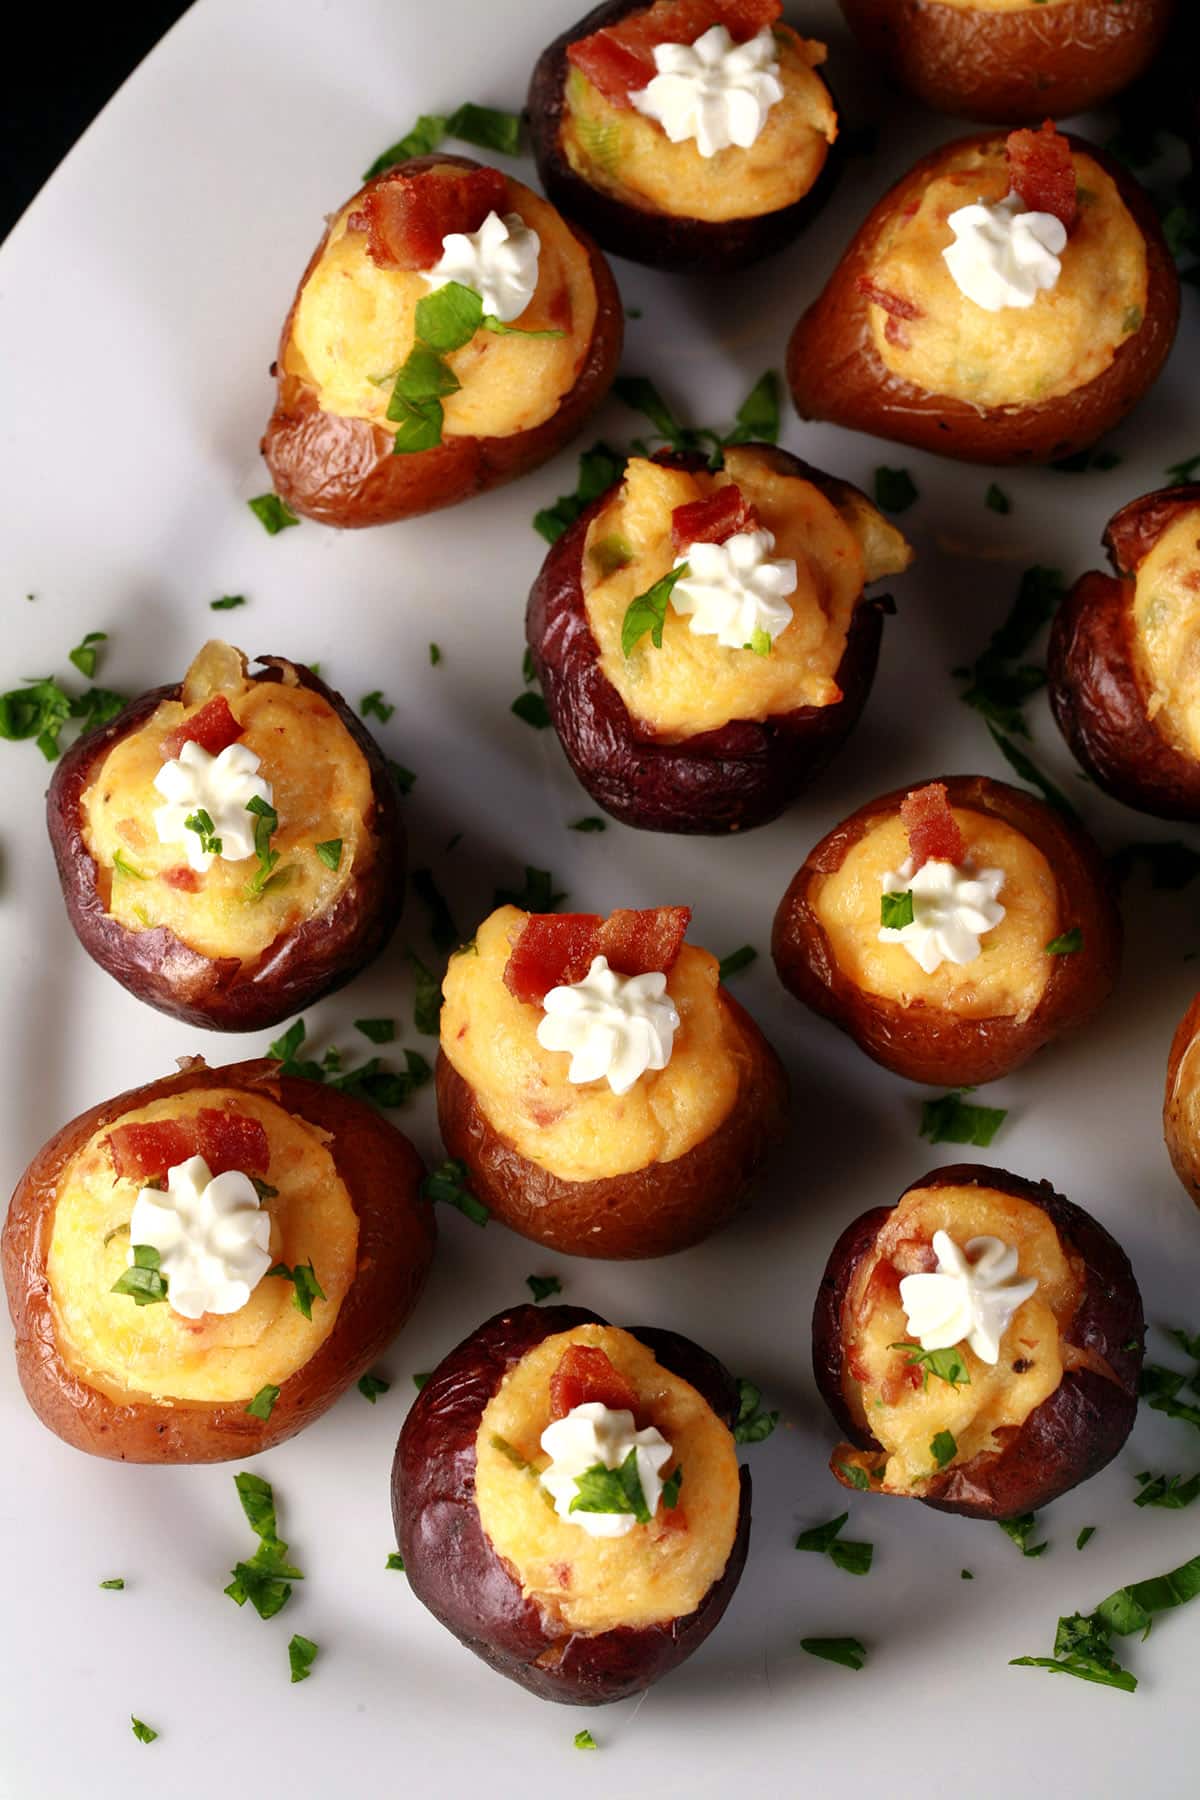 A party platter of loaded mini baked potatoes, topped with sour cream, bacon, and green onion.